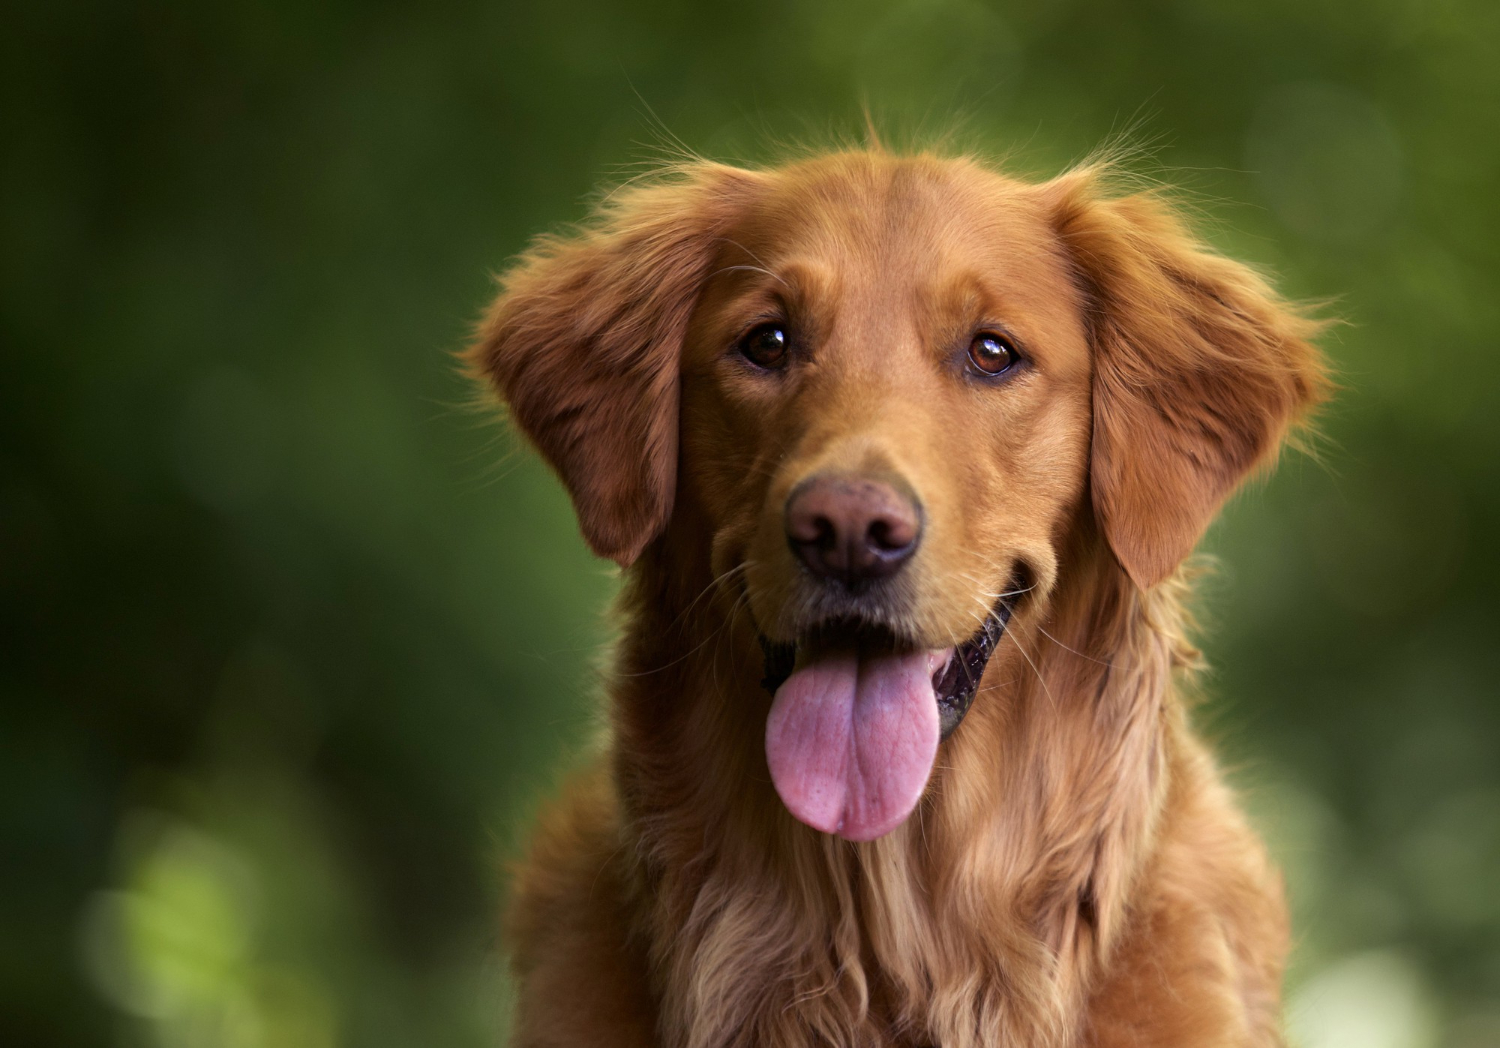 Dogs with megaesophagus can lead a relatively normal life!